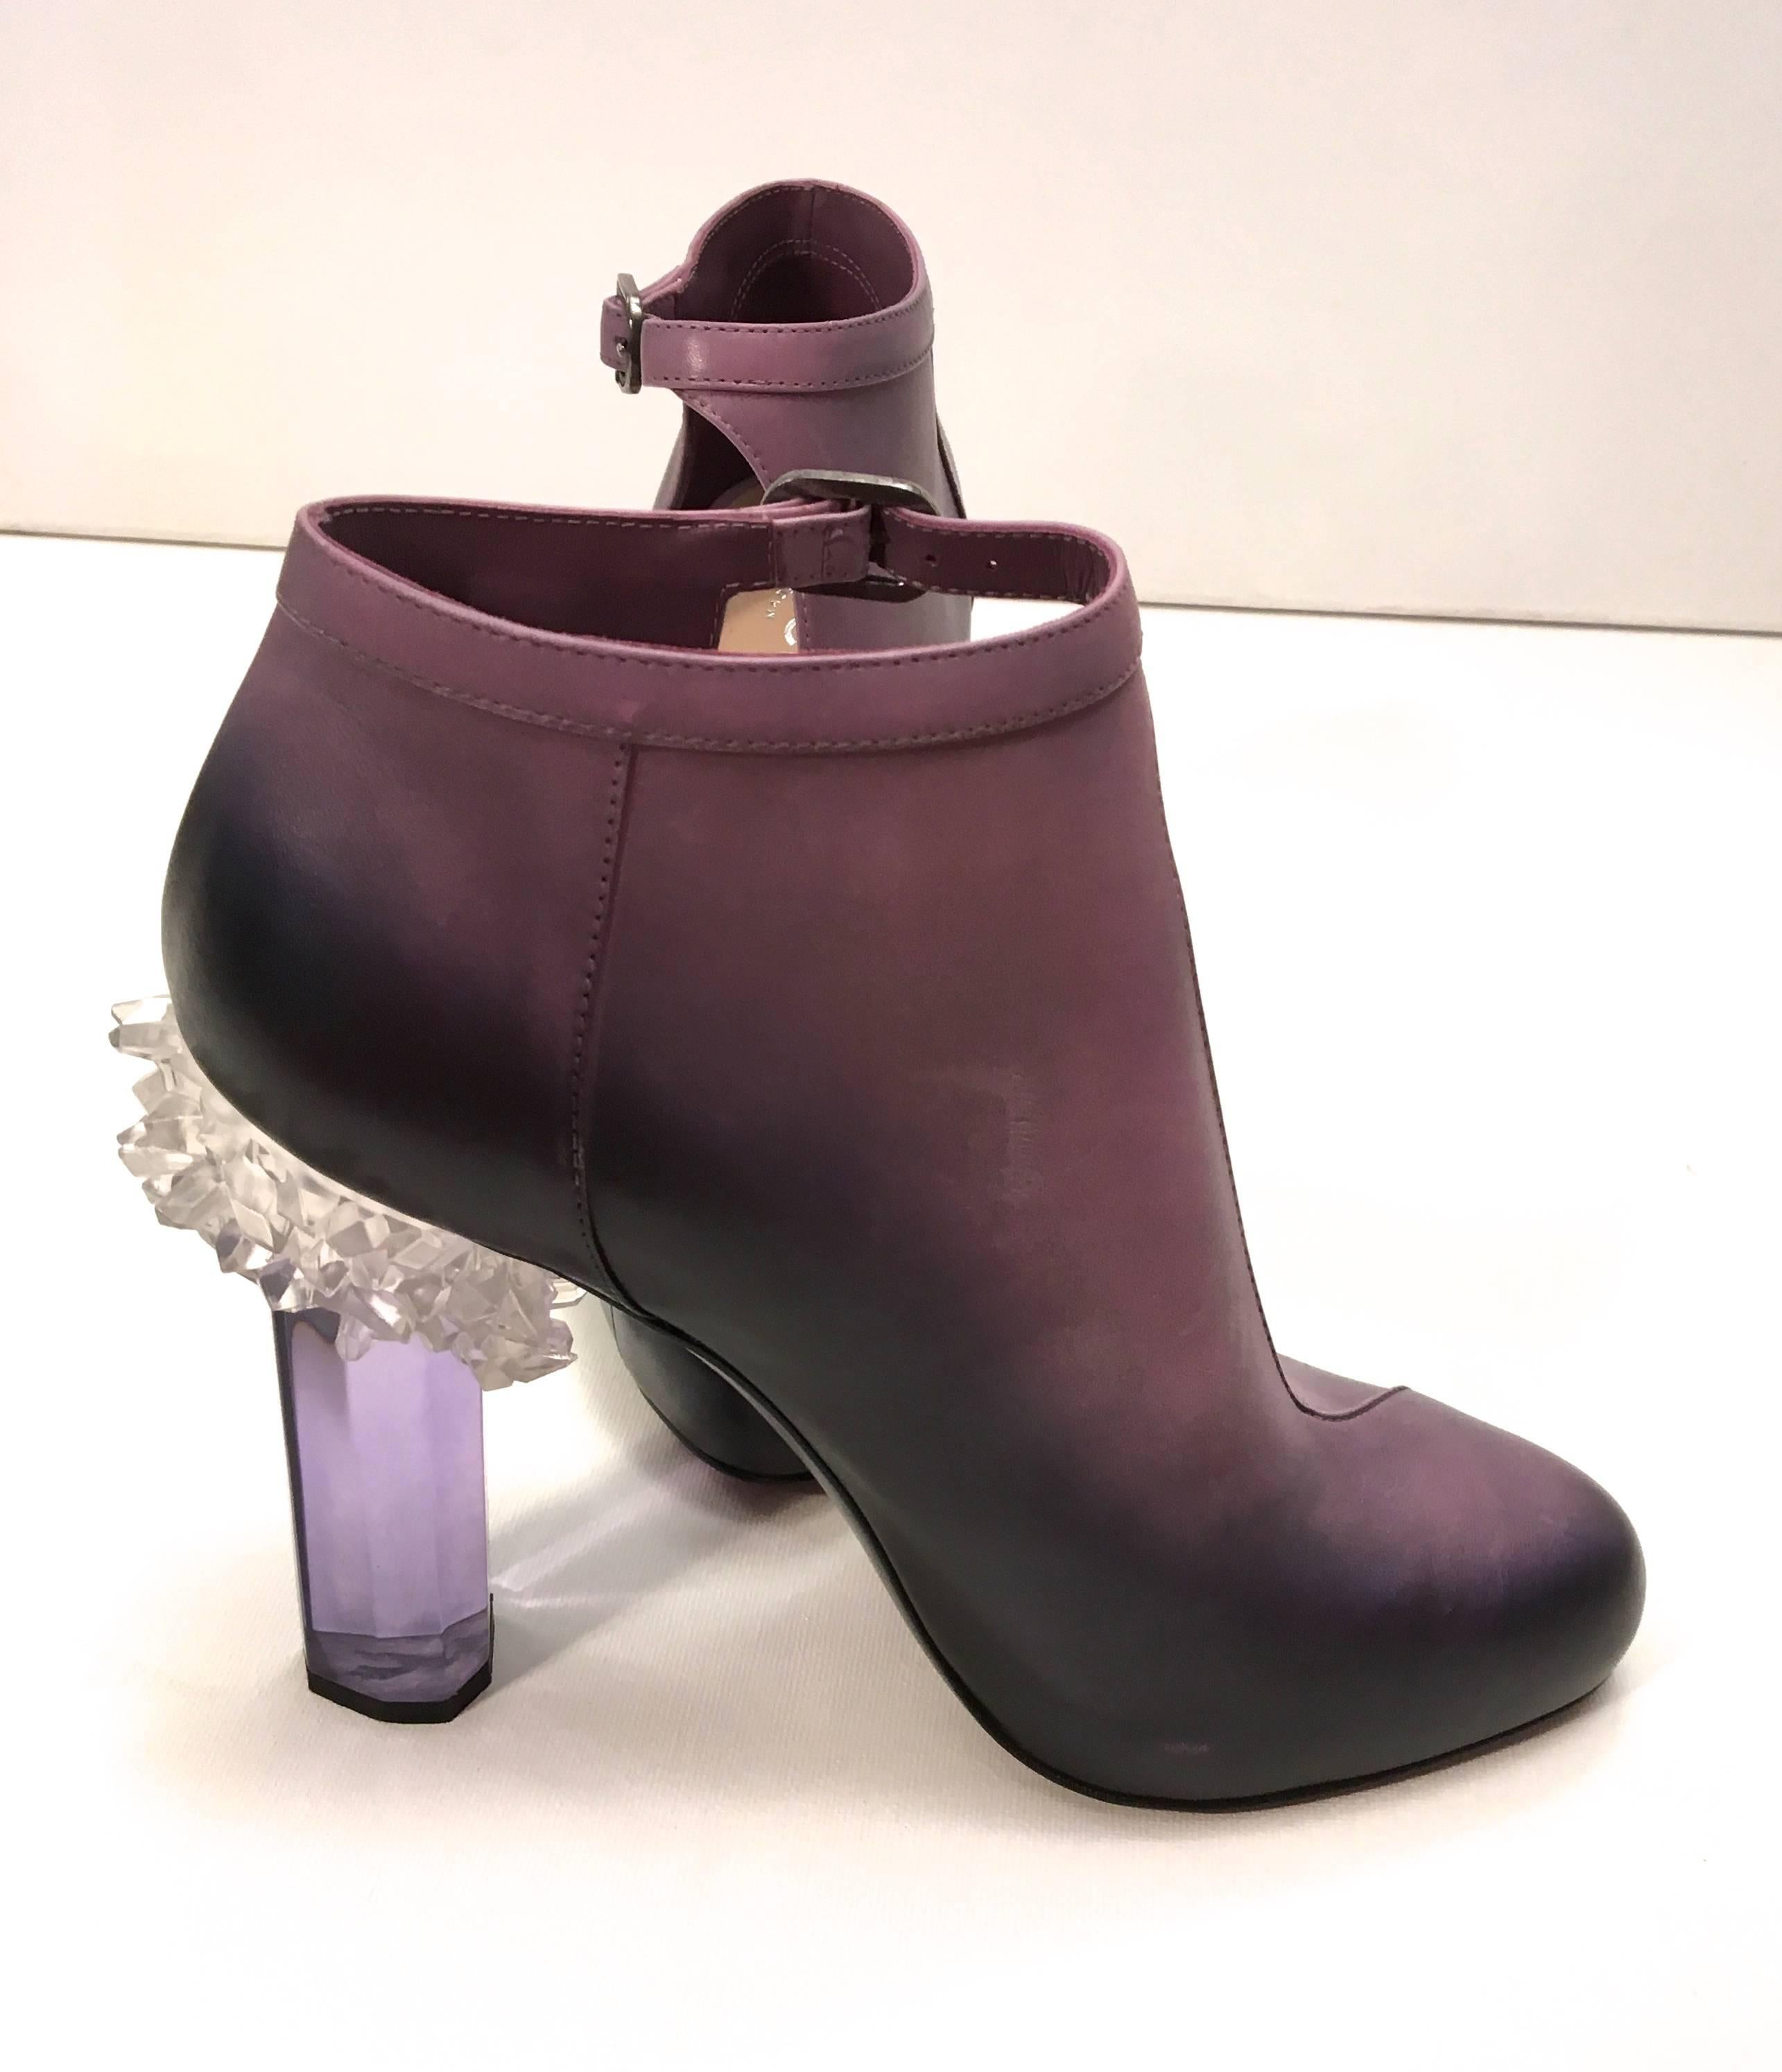 Rare Chanel Runway Boots - Purple and Black - Lucite Heels - Size 38 3